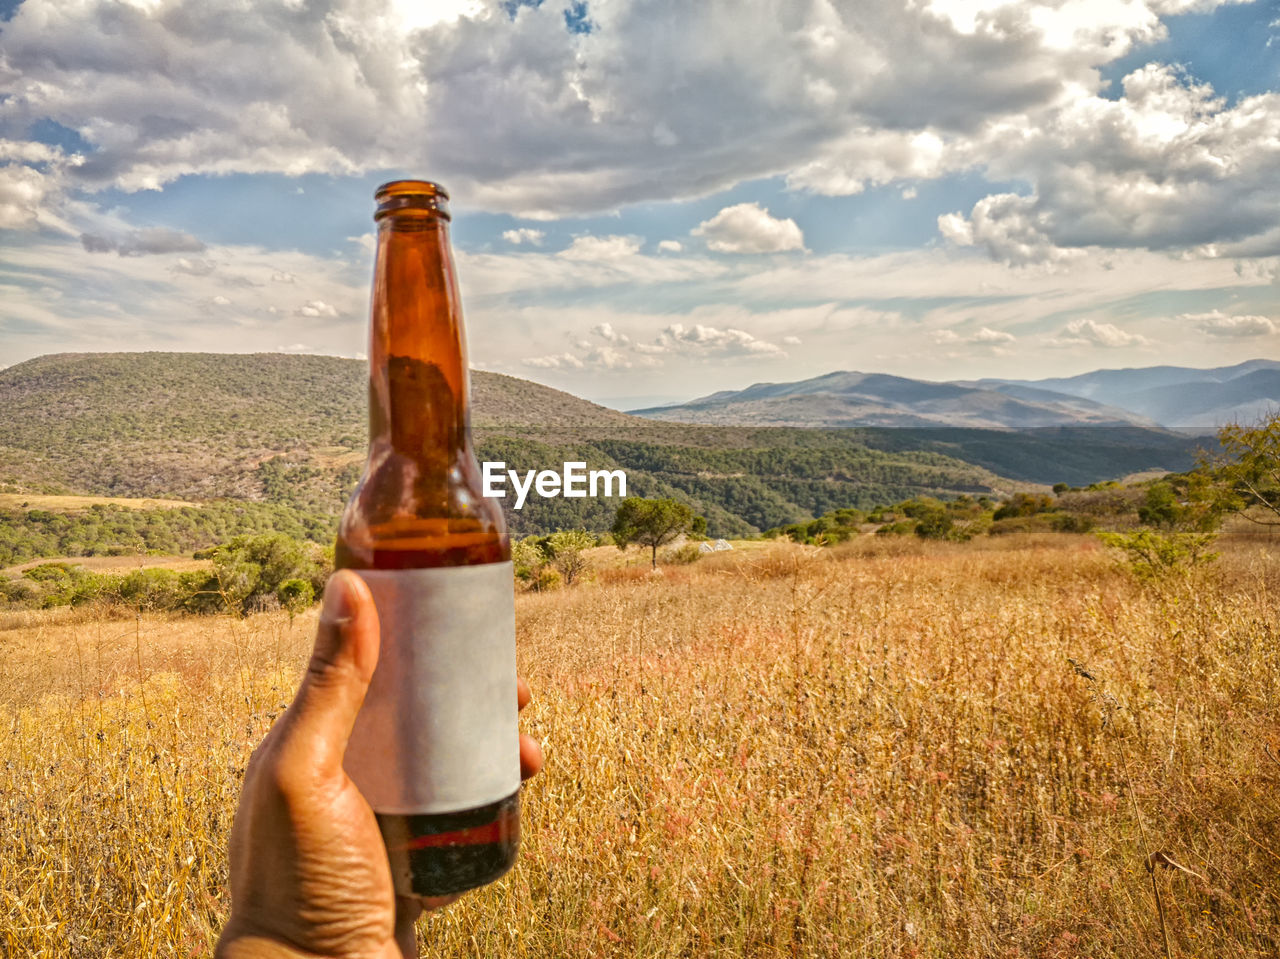 A hand is holding a beer bottle with blank label on the mountainside. travel in guerrero, mexico.